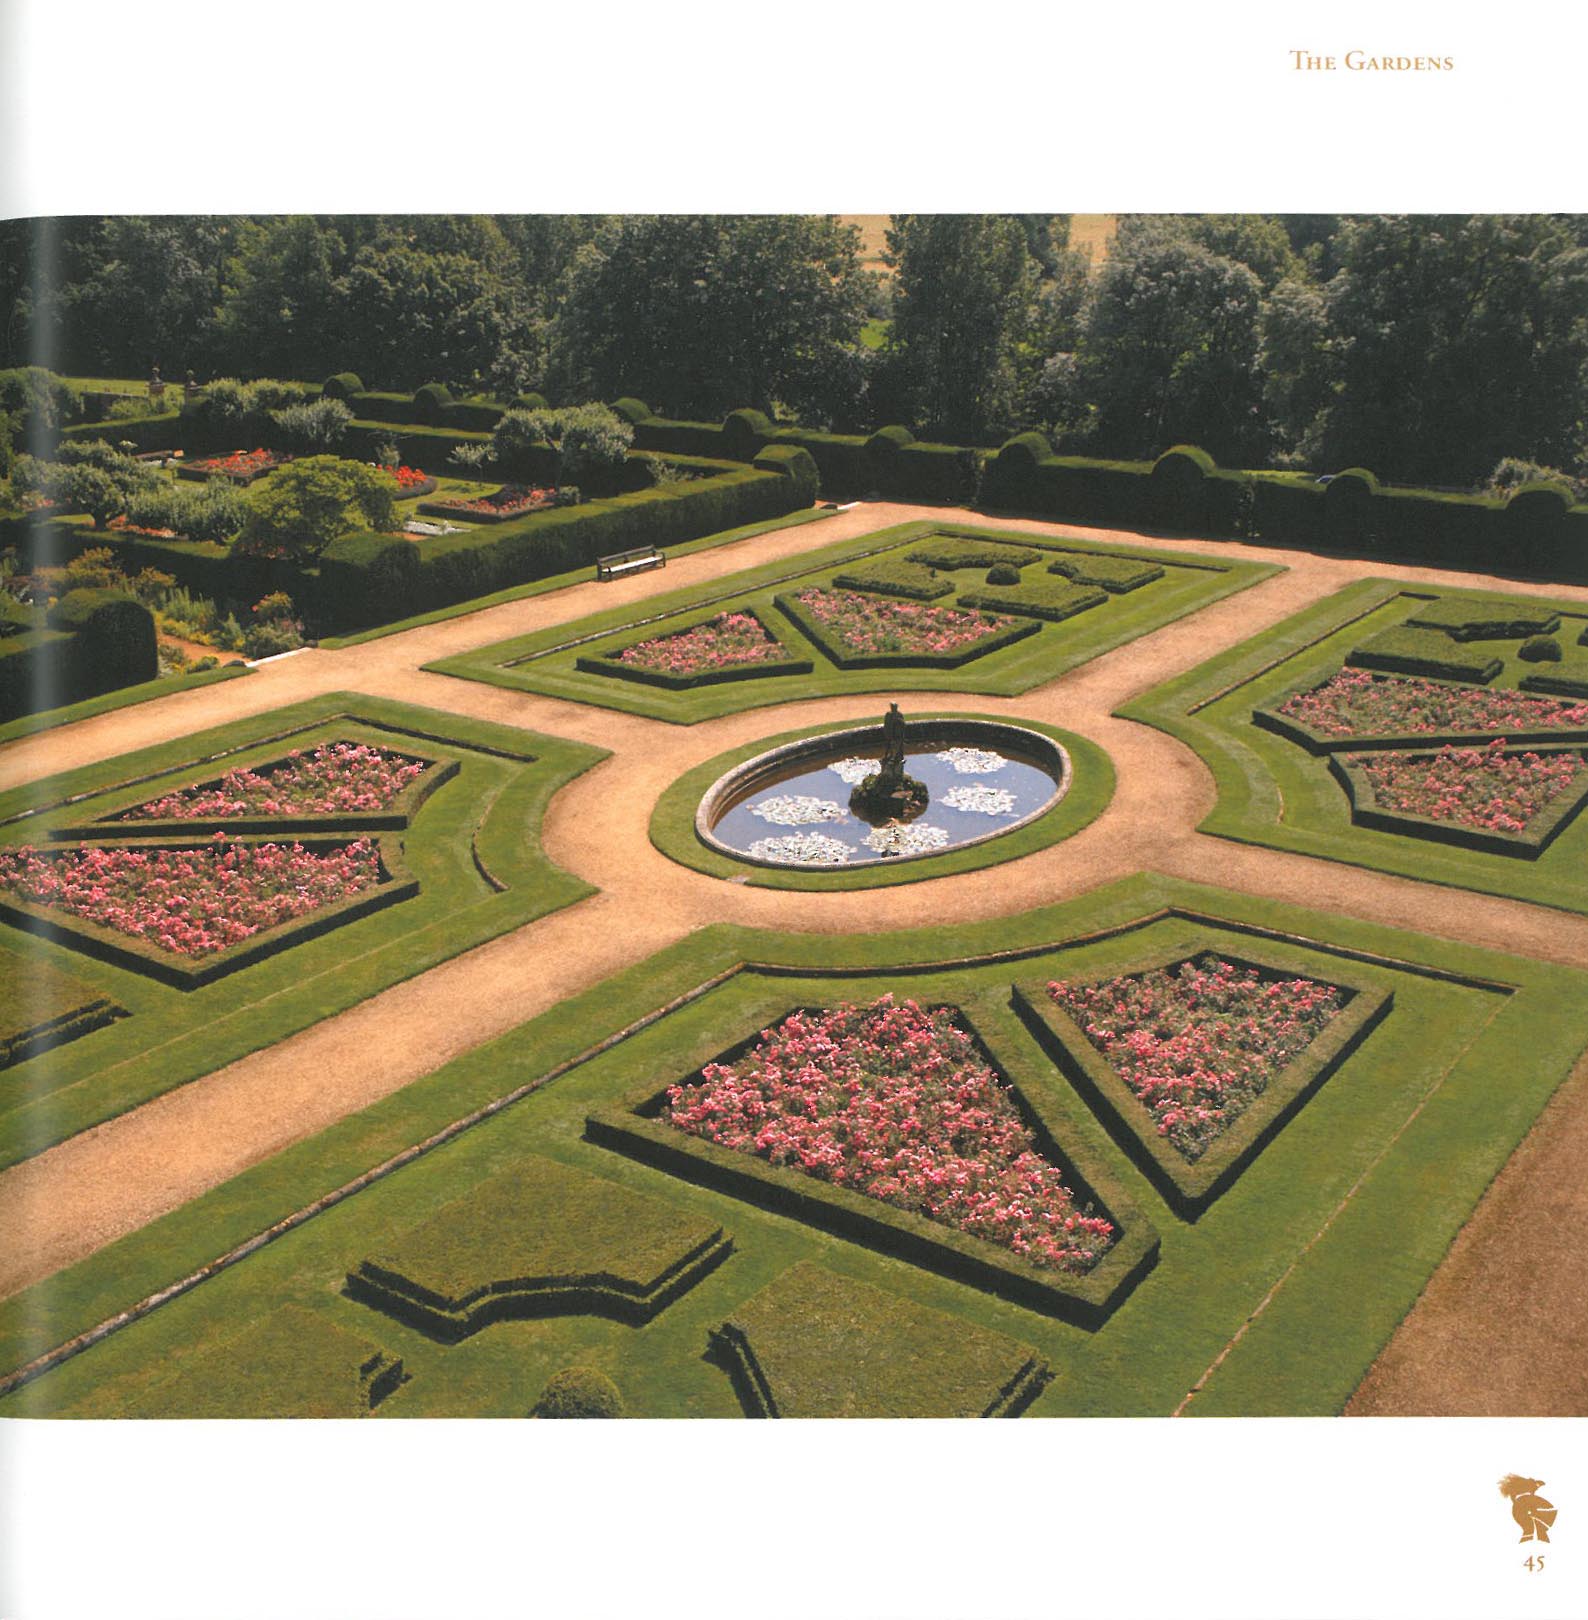 The Italian Garden, as seen from the highest floor of the House. Image courtesy of Penshurst Place.